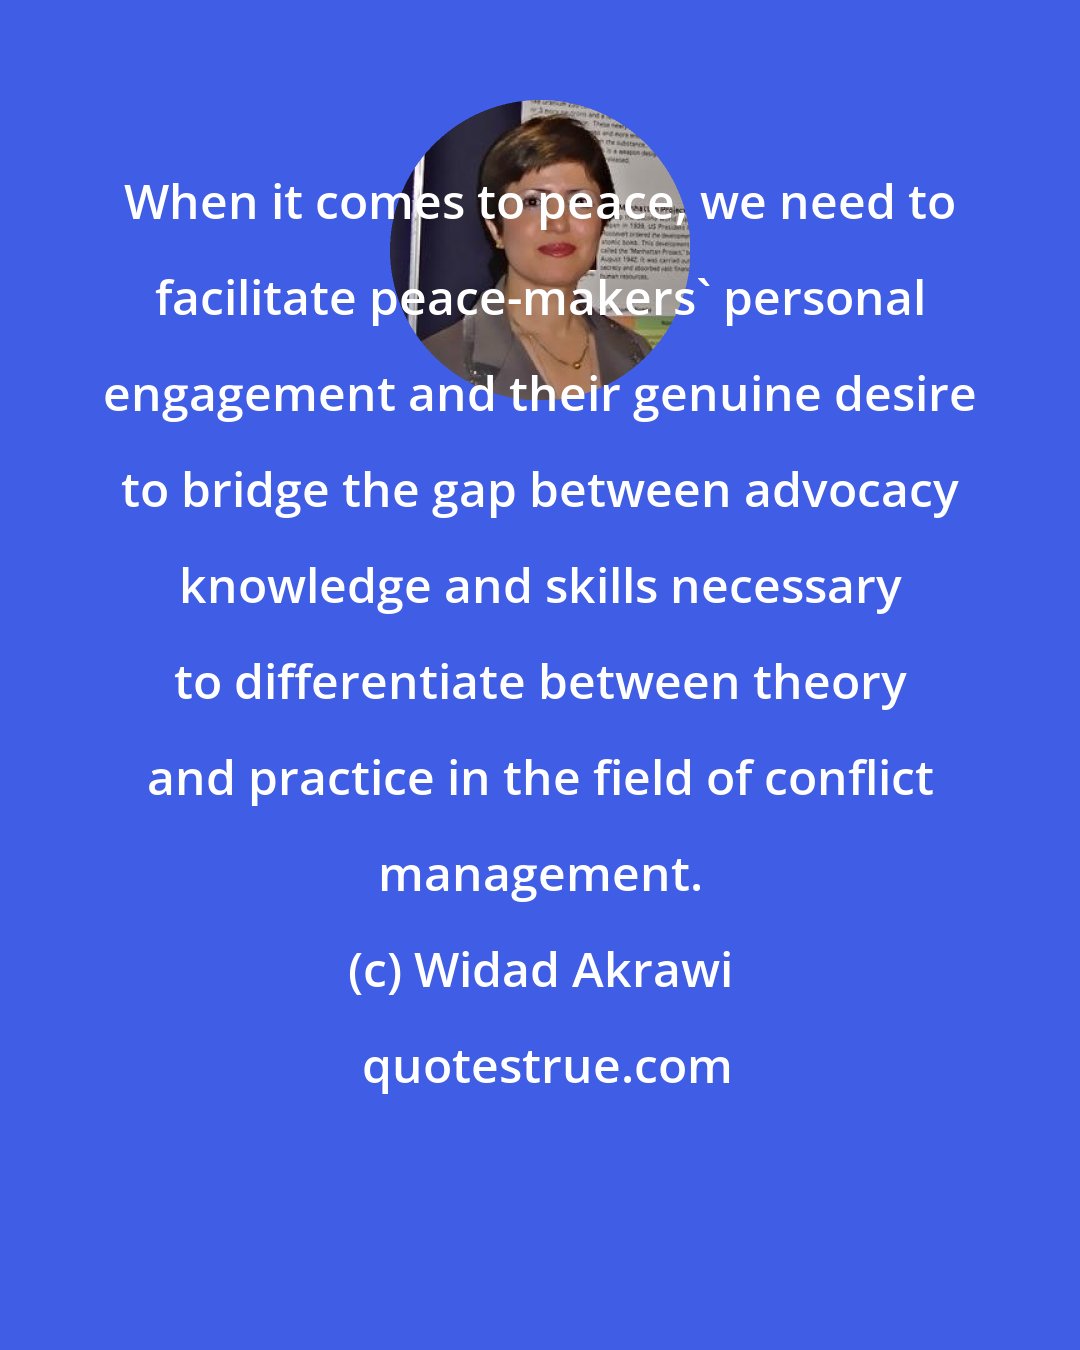 Widad Akrawi: When it comes to peace, we need to facilitate peace-makers' personal engagement and their genuine desire to bridge the gap between advocacy knowledge and skills necessary to differentiate between theory and practice in the field of conflict management.